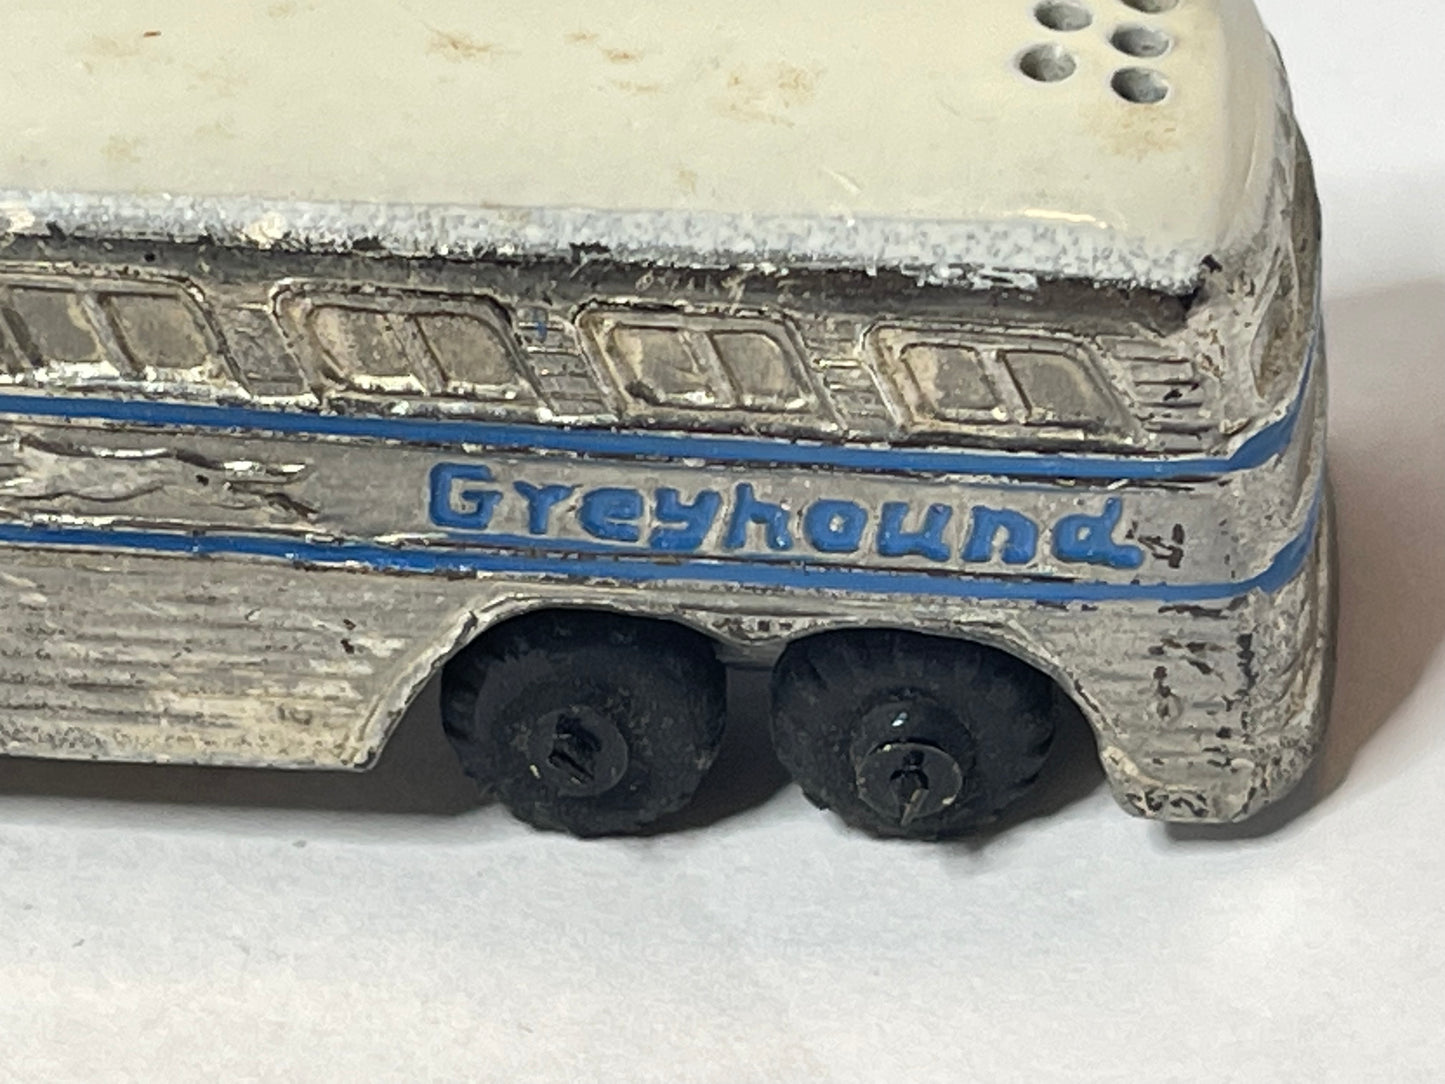 Greyhound bus salt and pepper shakers